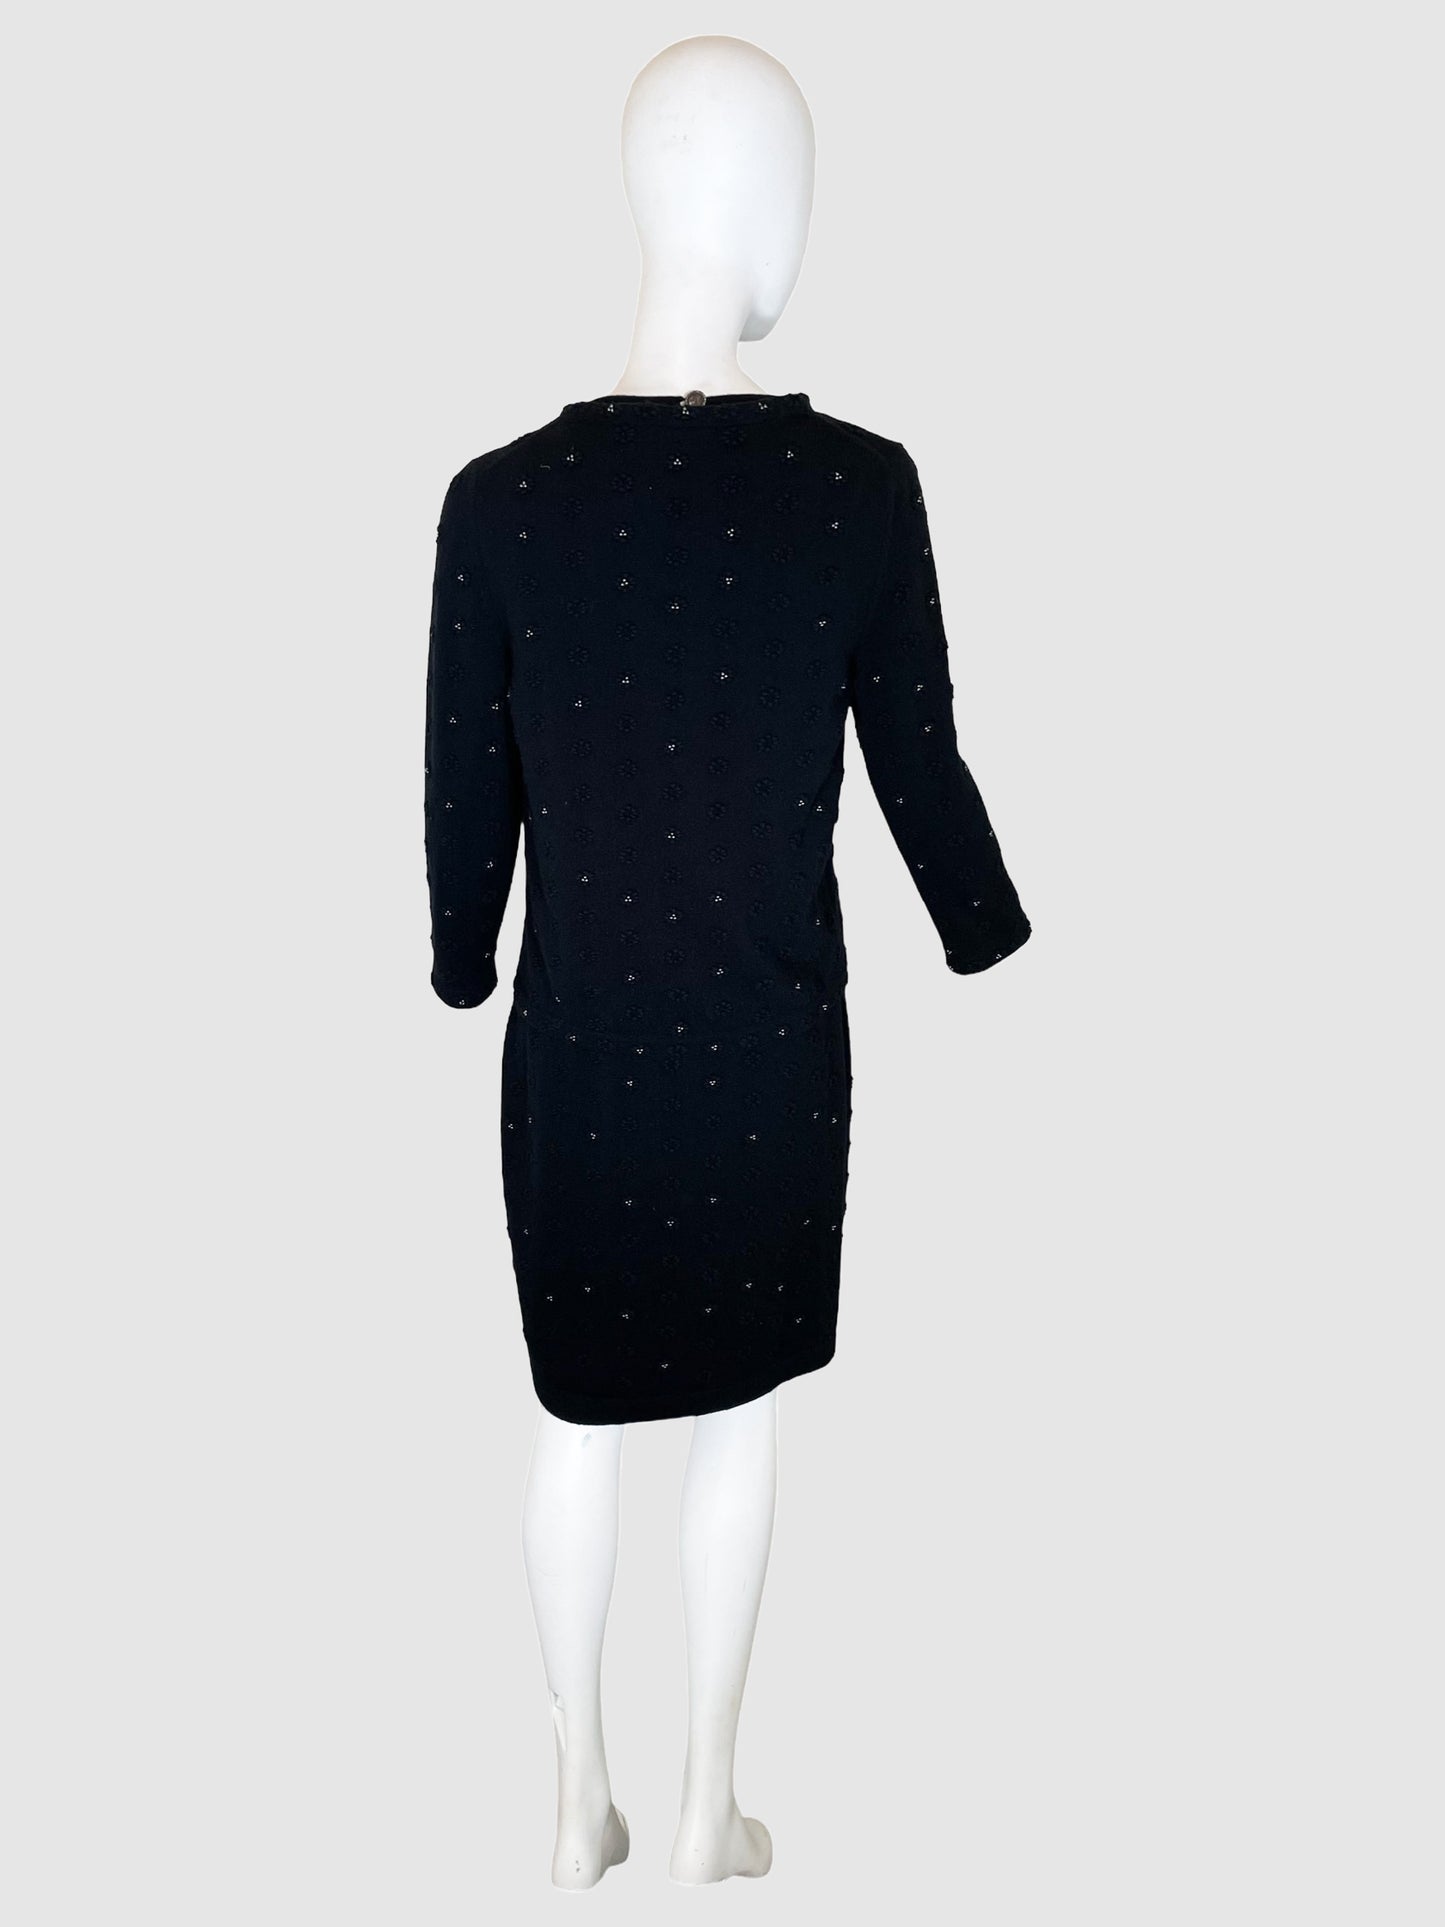 Chanel Cashmere Dress and Cardigan 2-Piece - Size 42